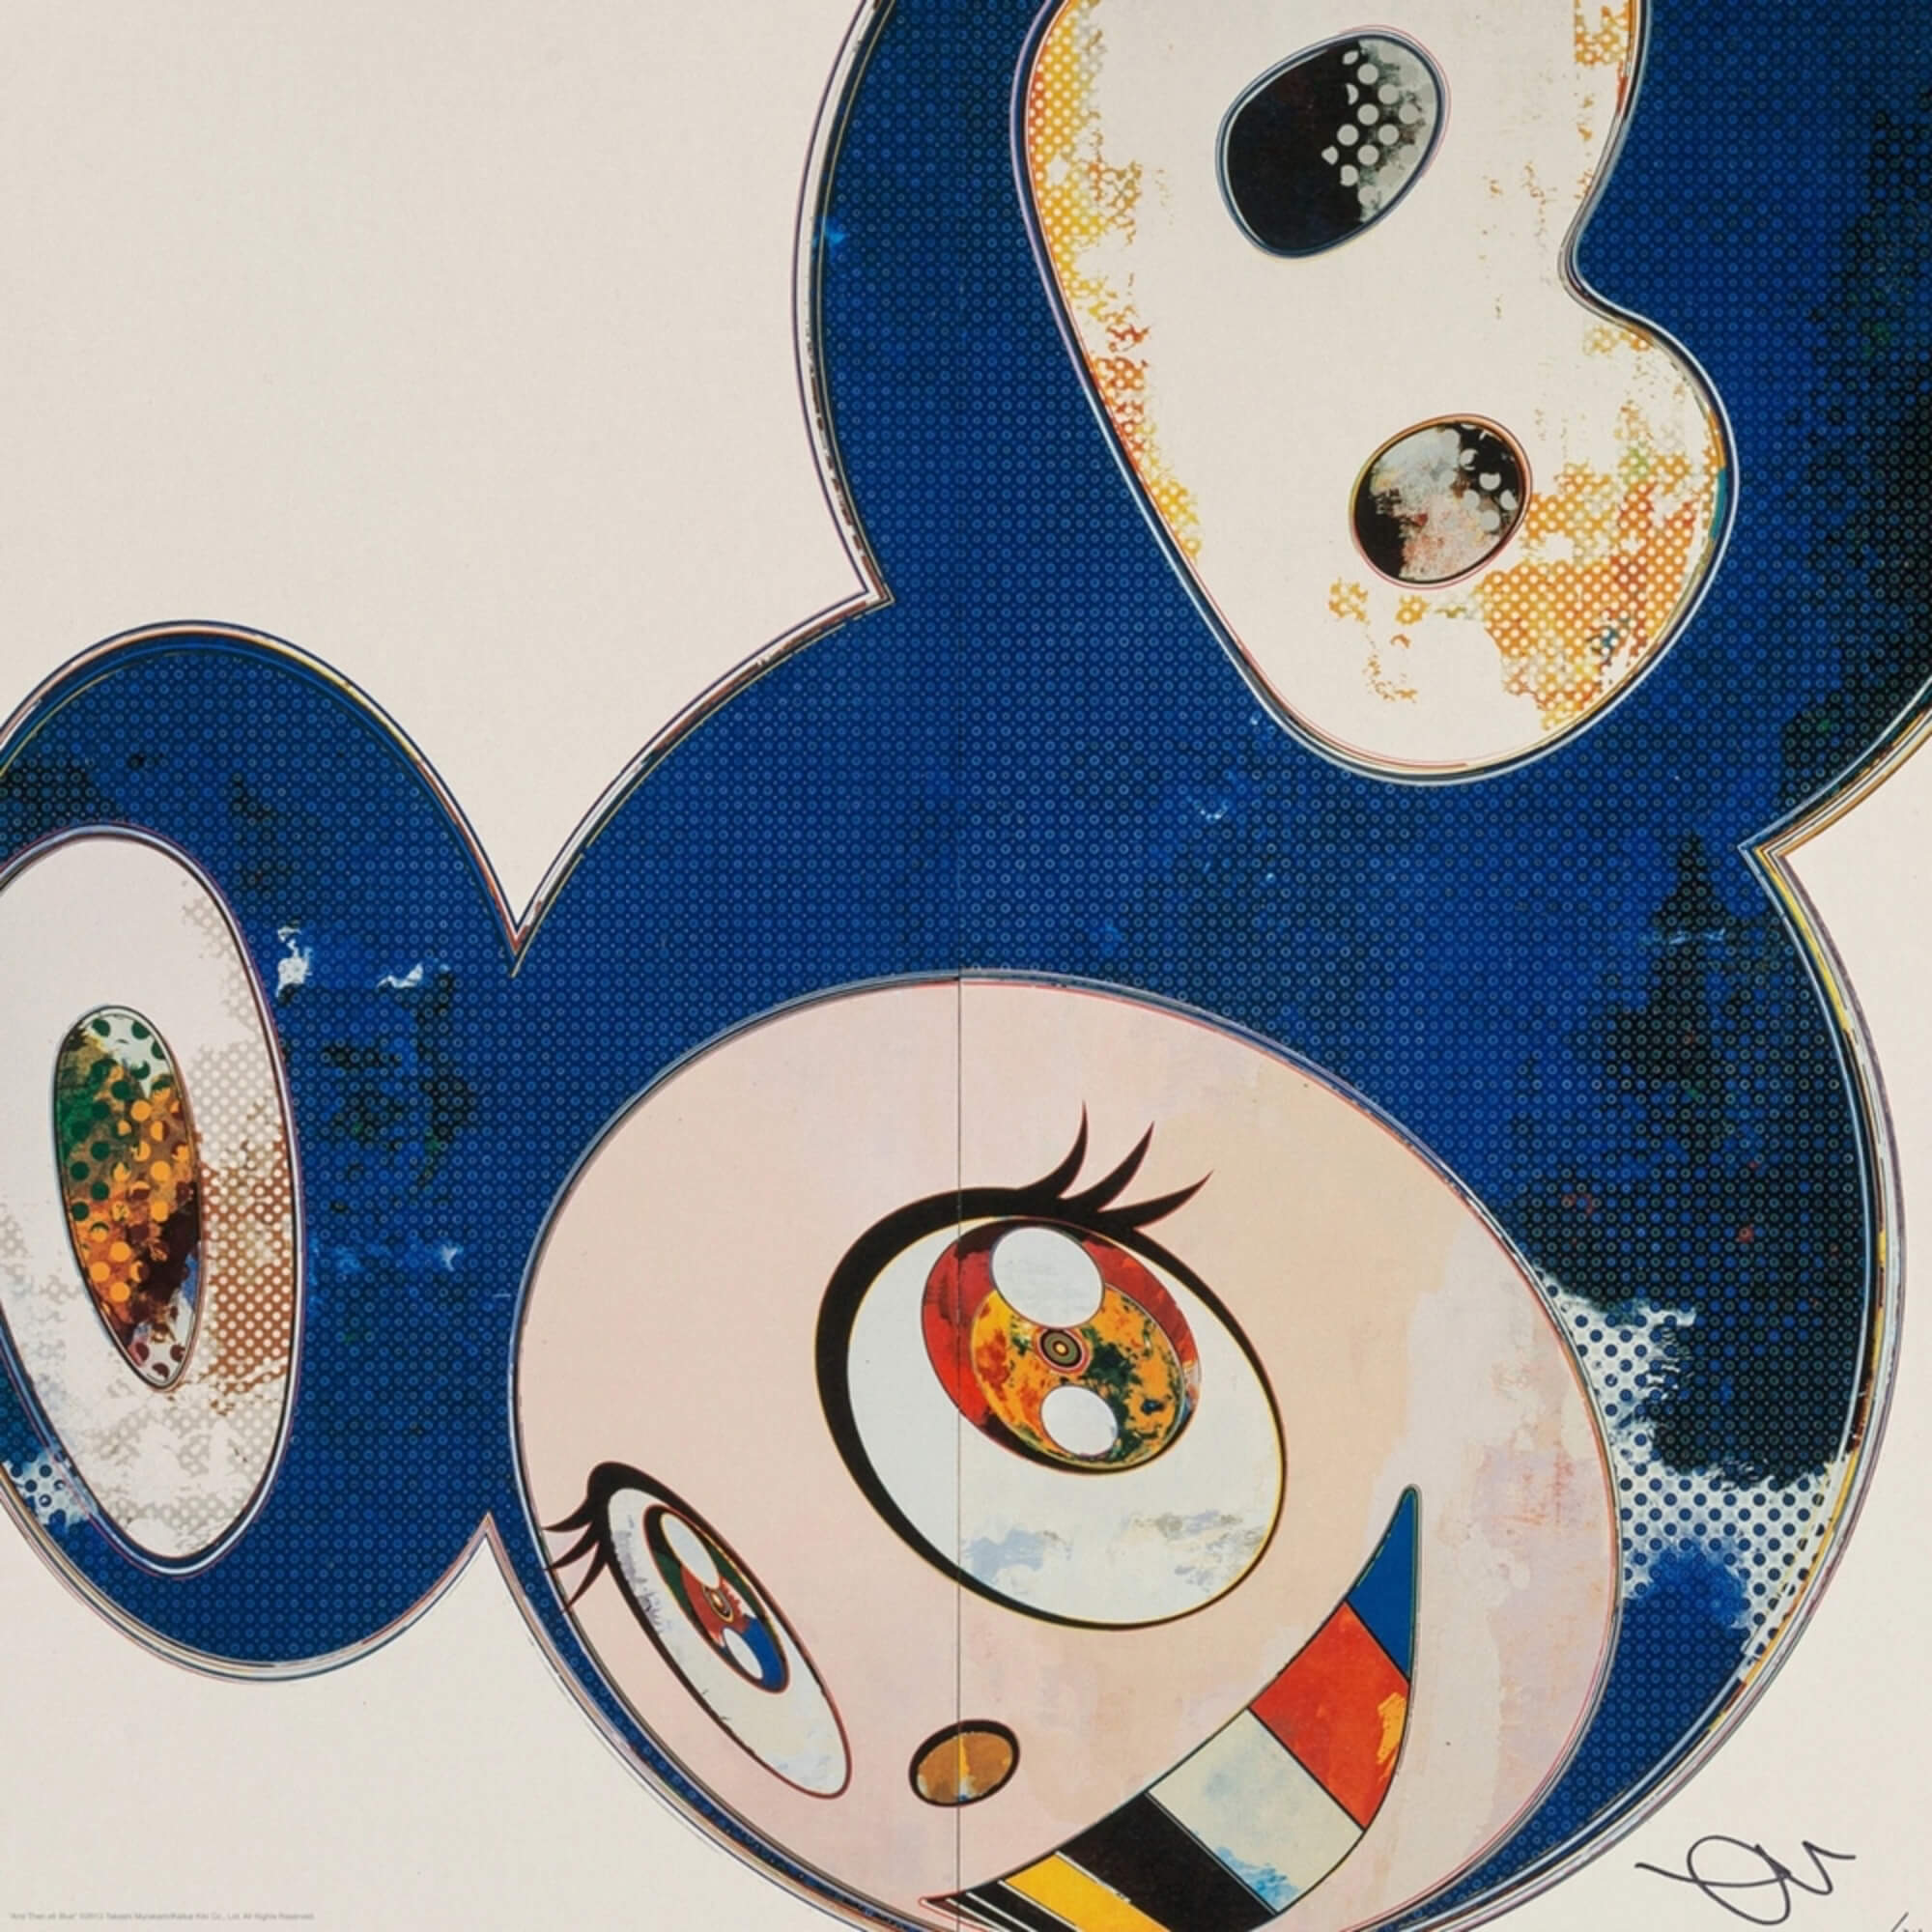 The Malvern School's artist of the month is Takashi Murakami. Learn more  about our artist of the month program and how we encourage creativity.